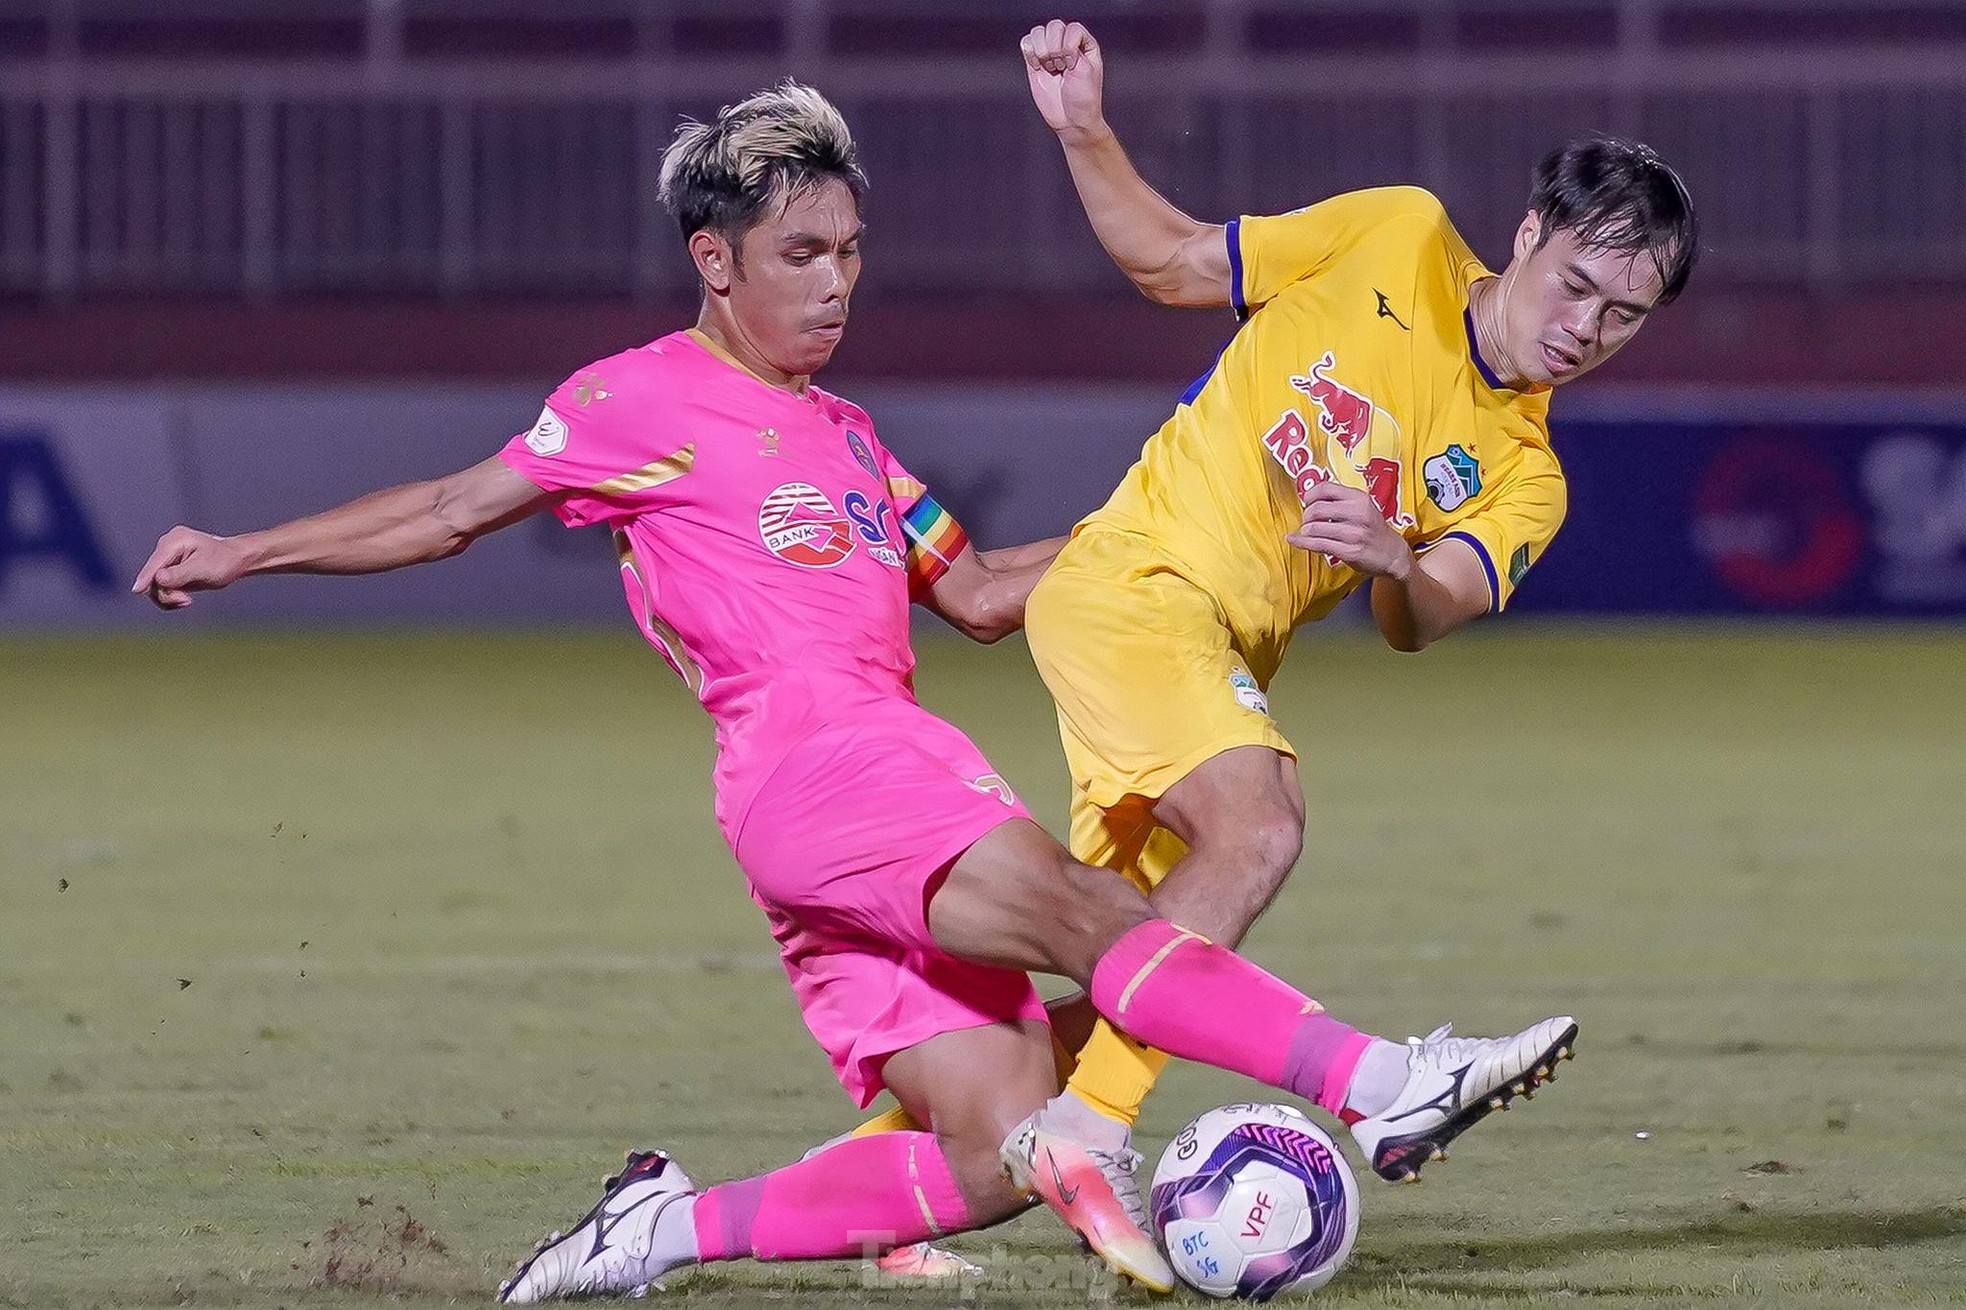 Cong Phuong shines, HAGL rises to second in the table, Saigon FC is still at the bottom - Photo 4.